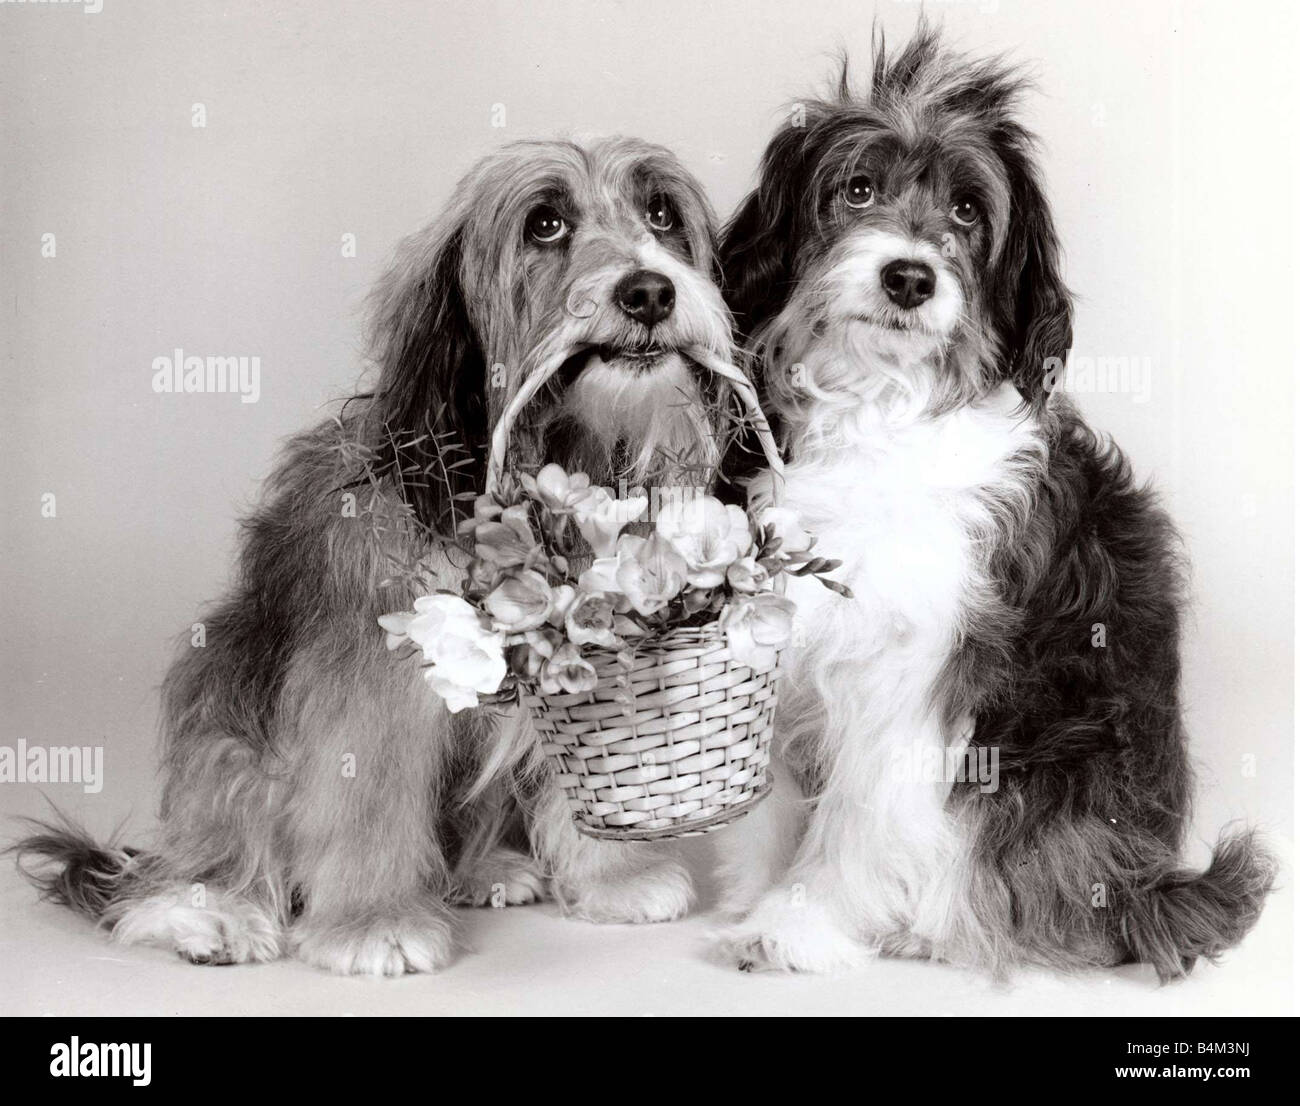 Duffy Pippin Dog Actors April 1987 with a basket of flowers mirrorpix Stock Photo